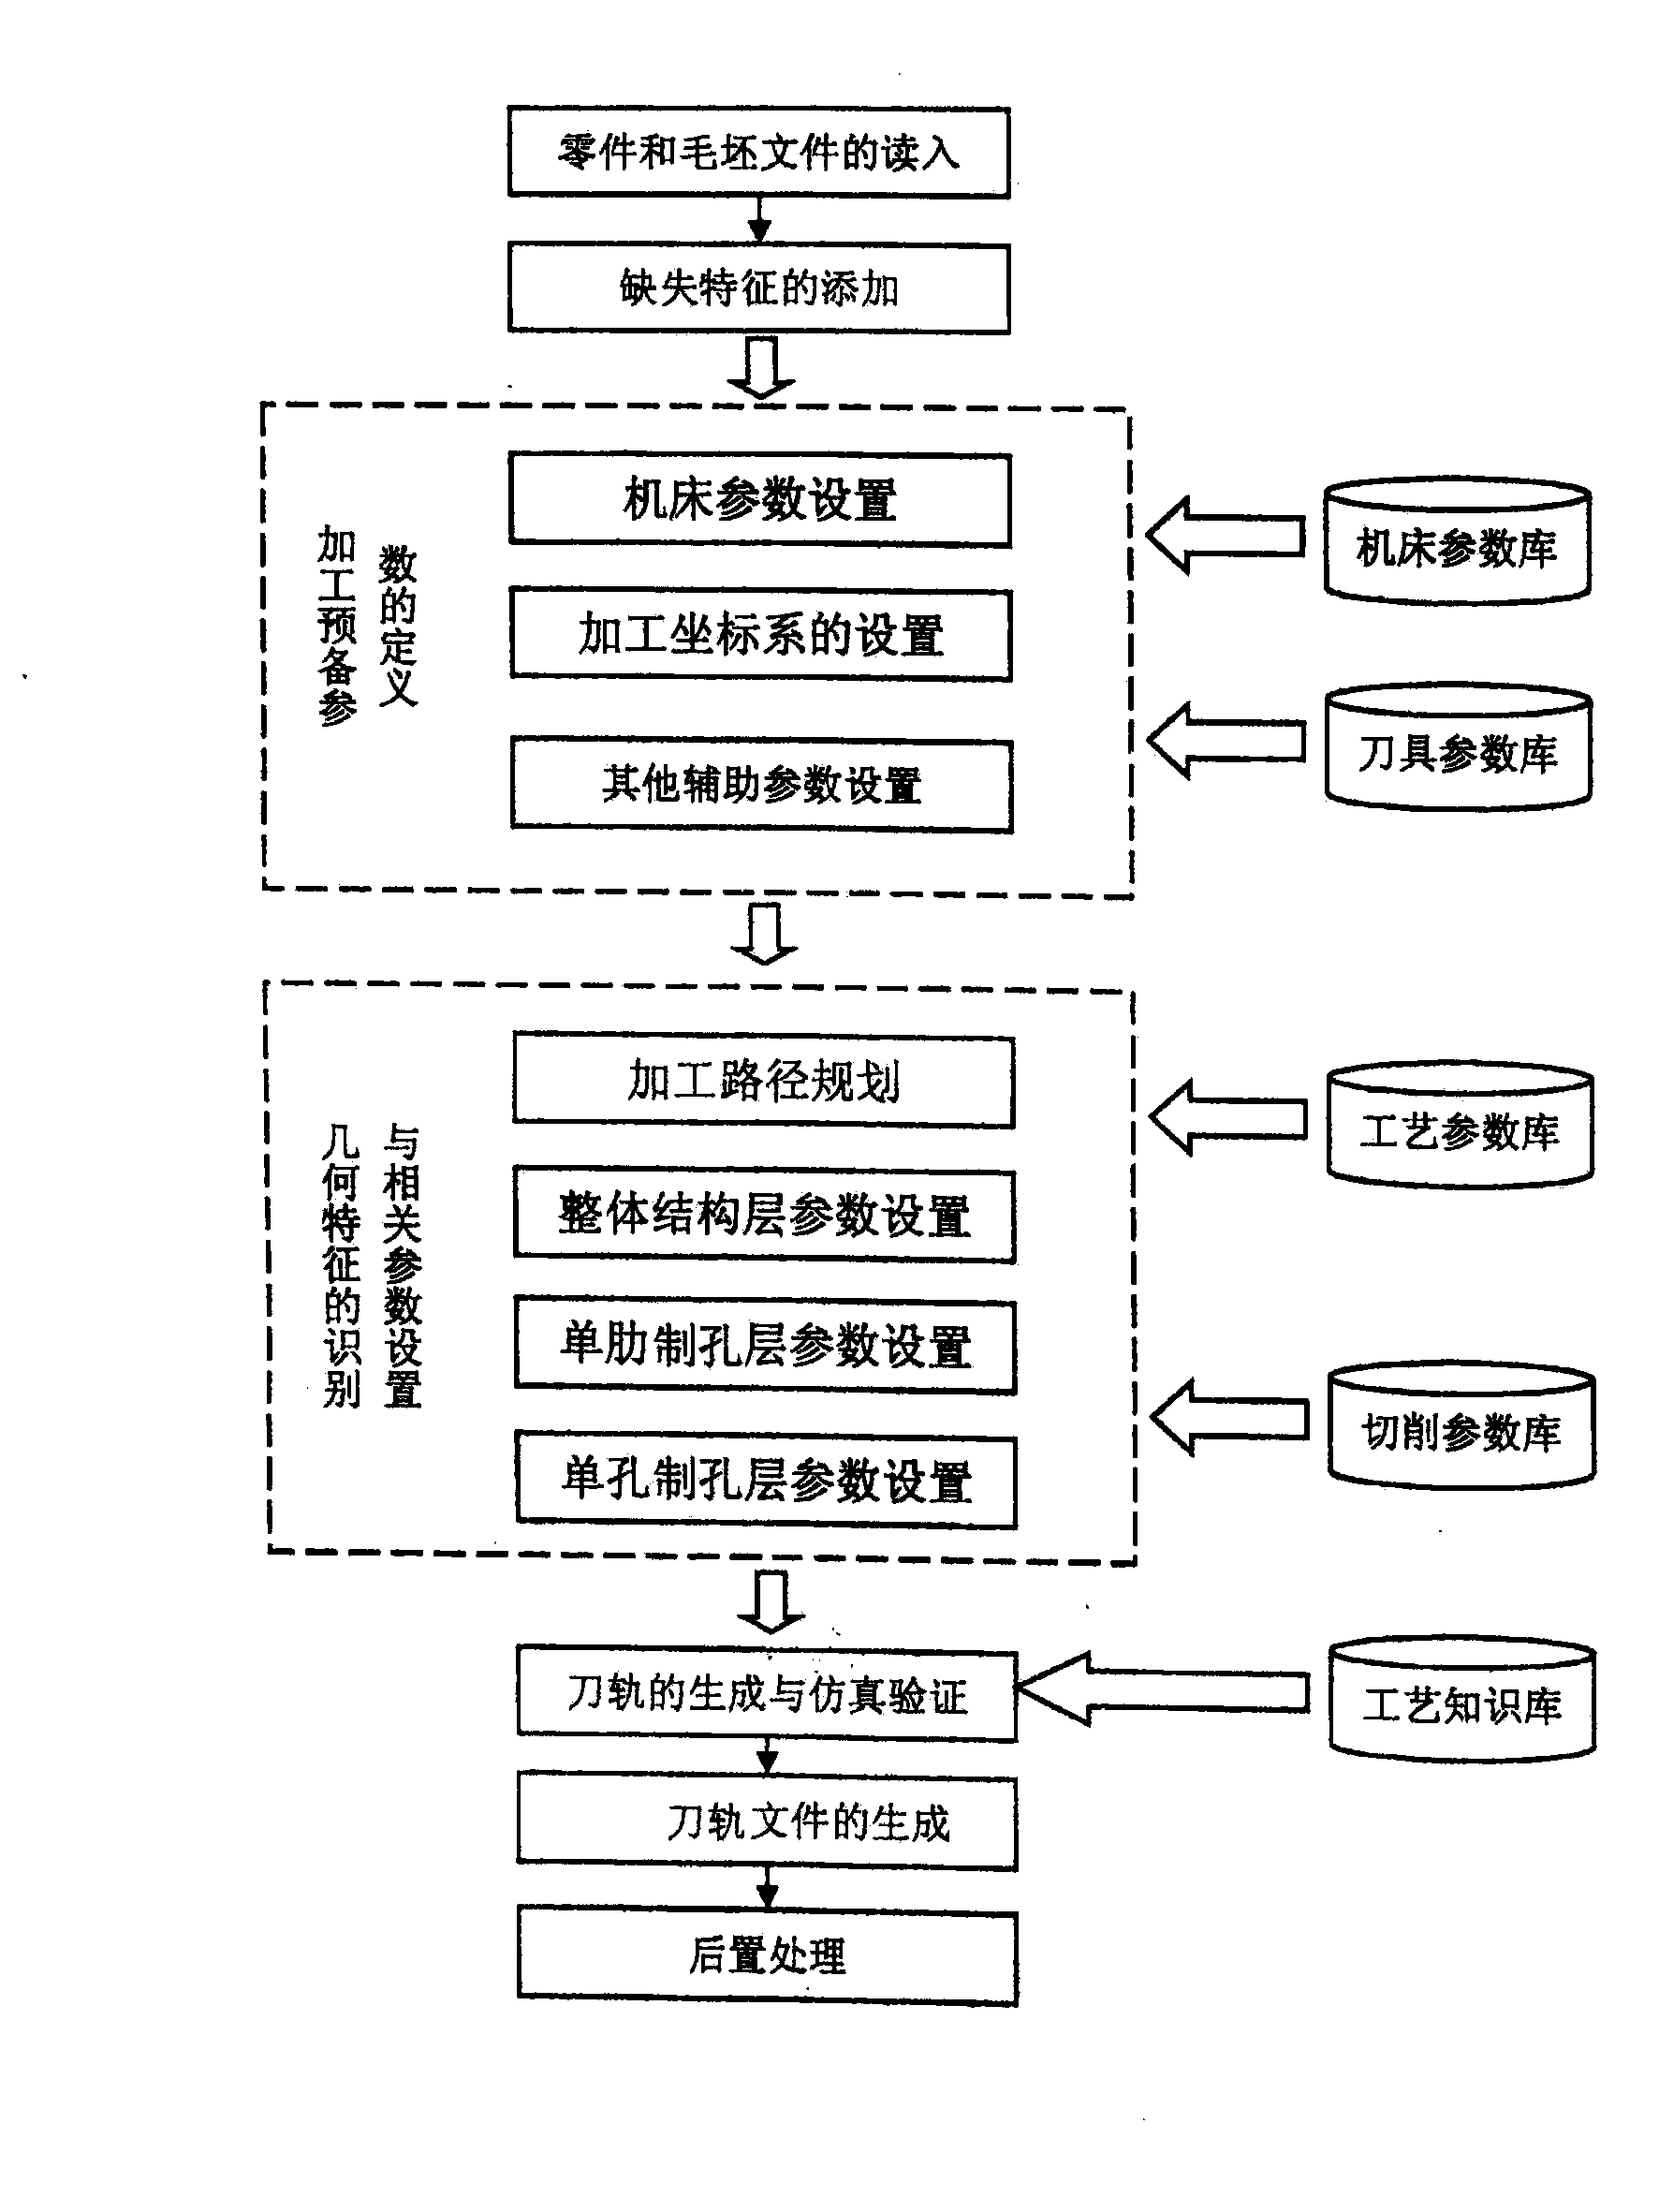 Multilayer numerical control programming method for flexible hole formation on large-scale wing part